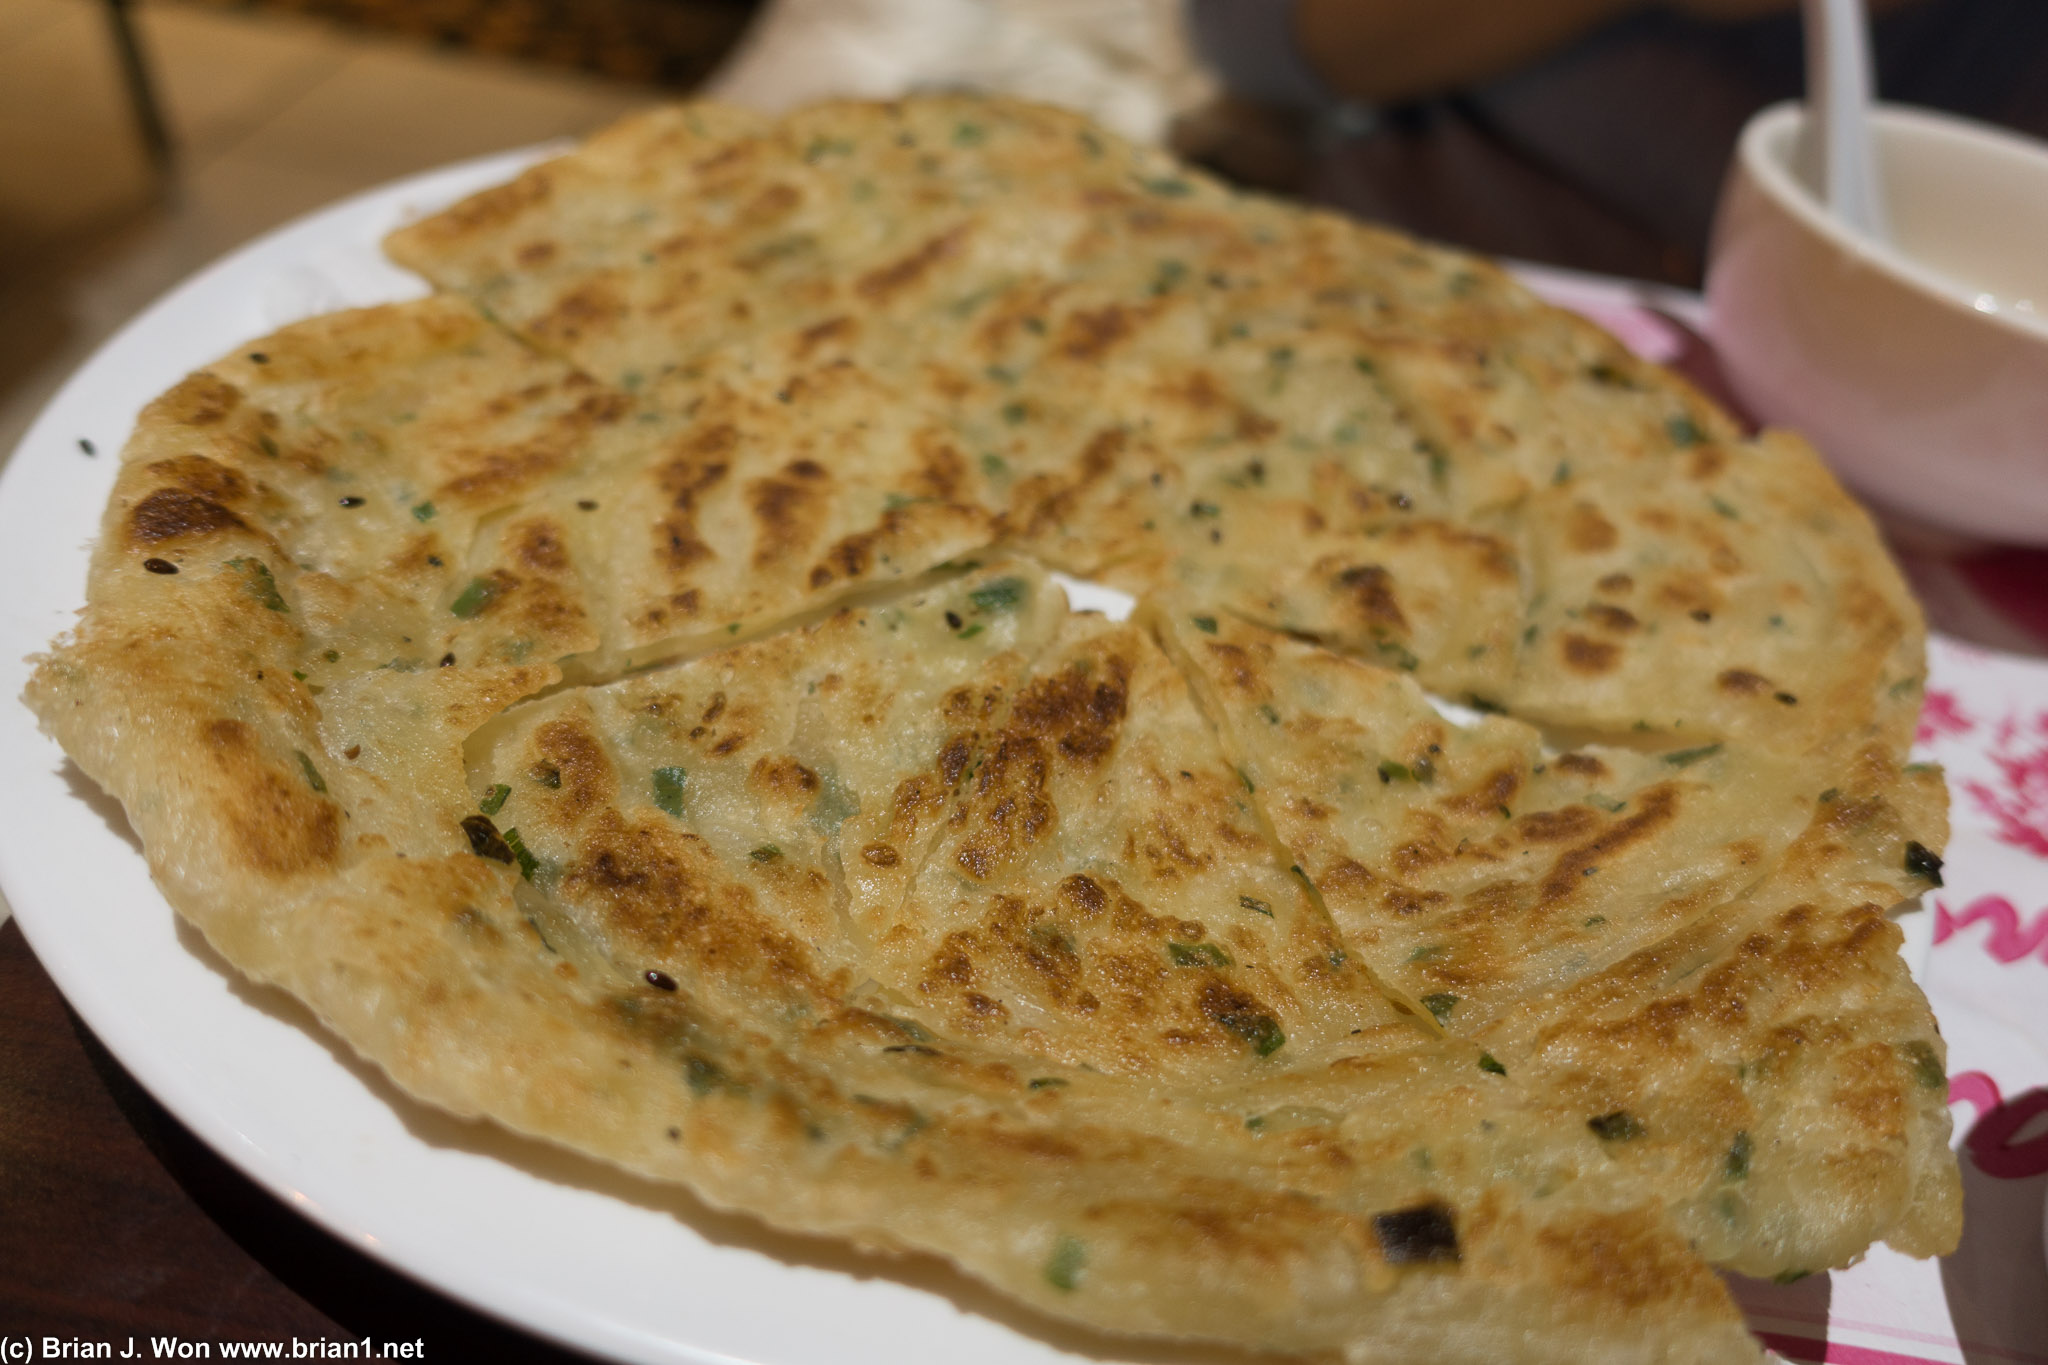 Green onion pancake. Again not the best, but pretty good.